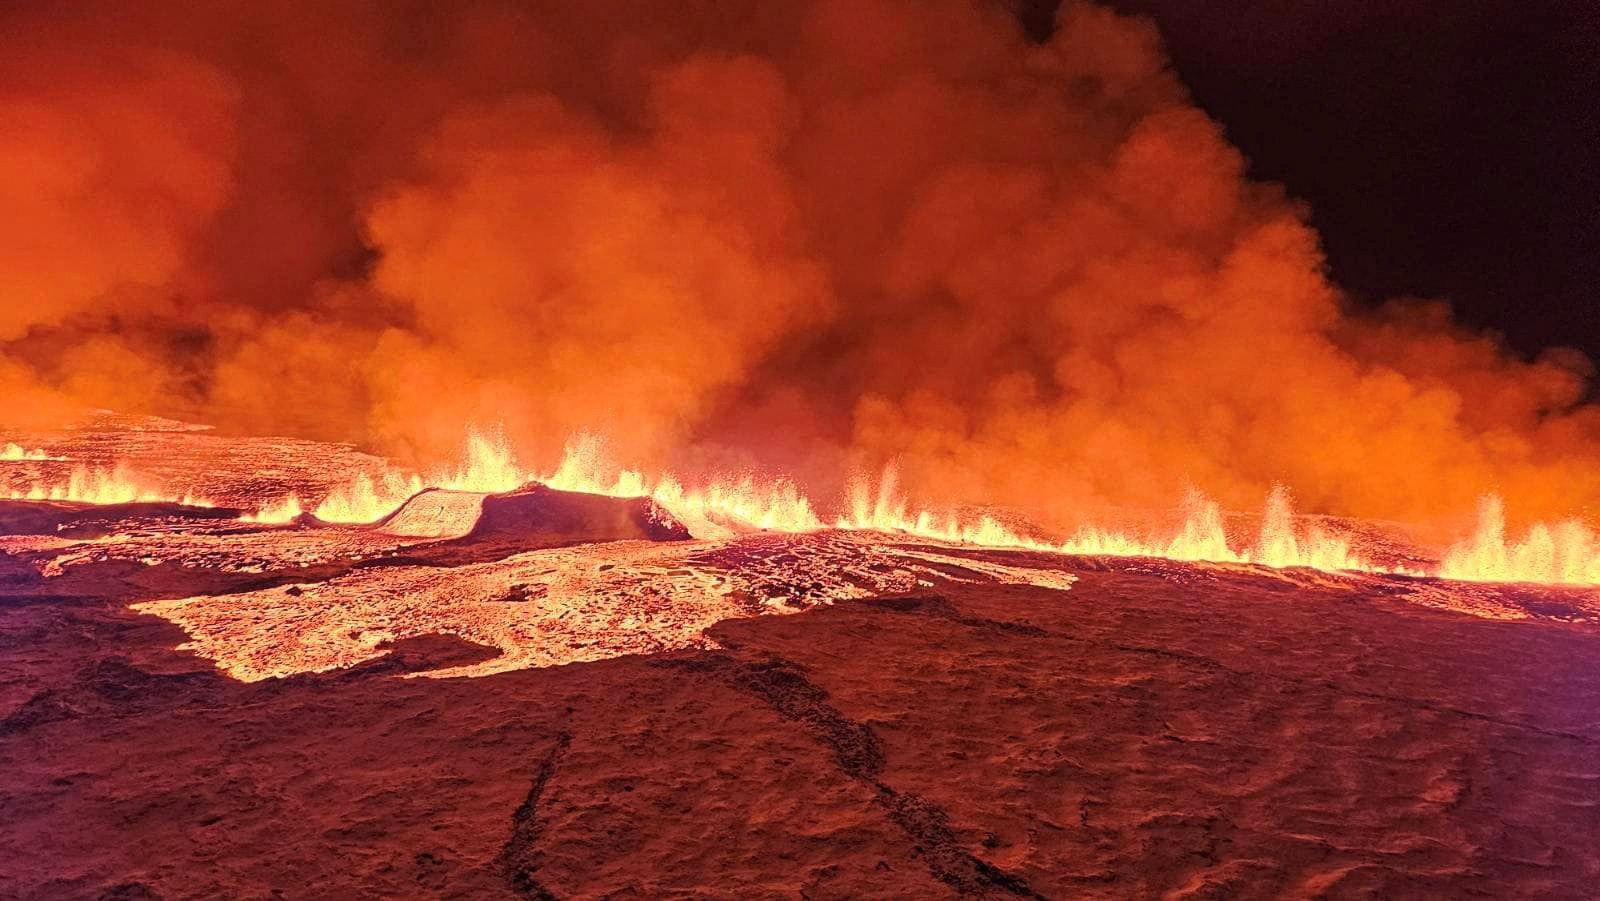 A volcano spews lava and smoke as it erupts in Grindavik